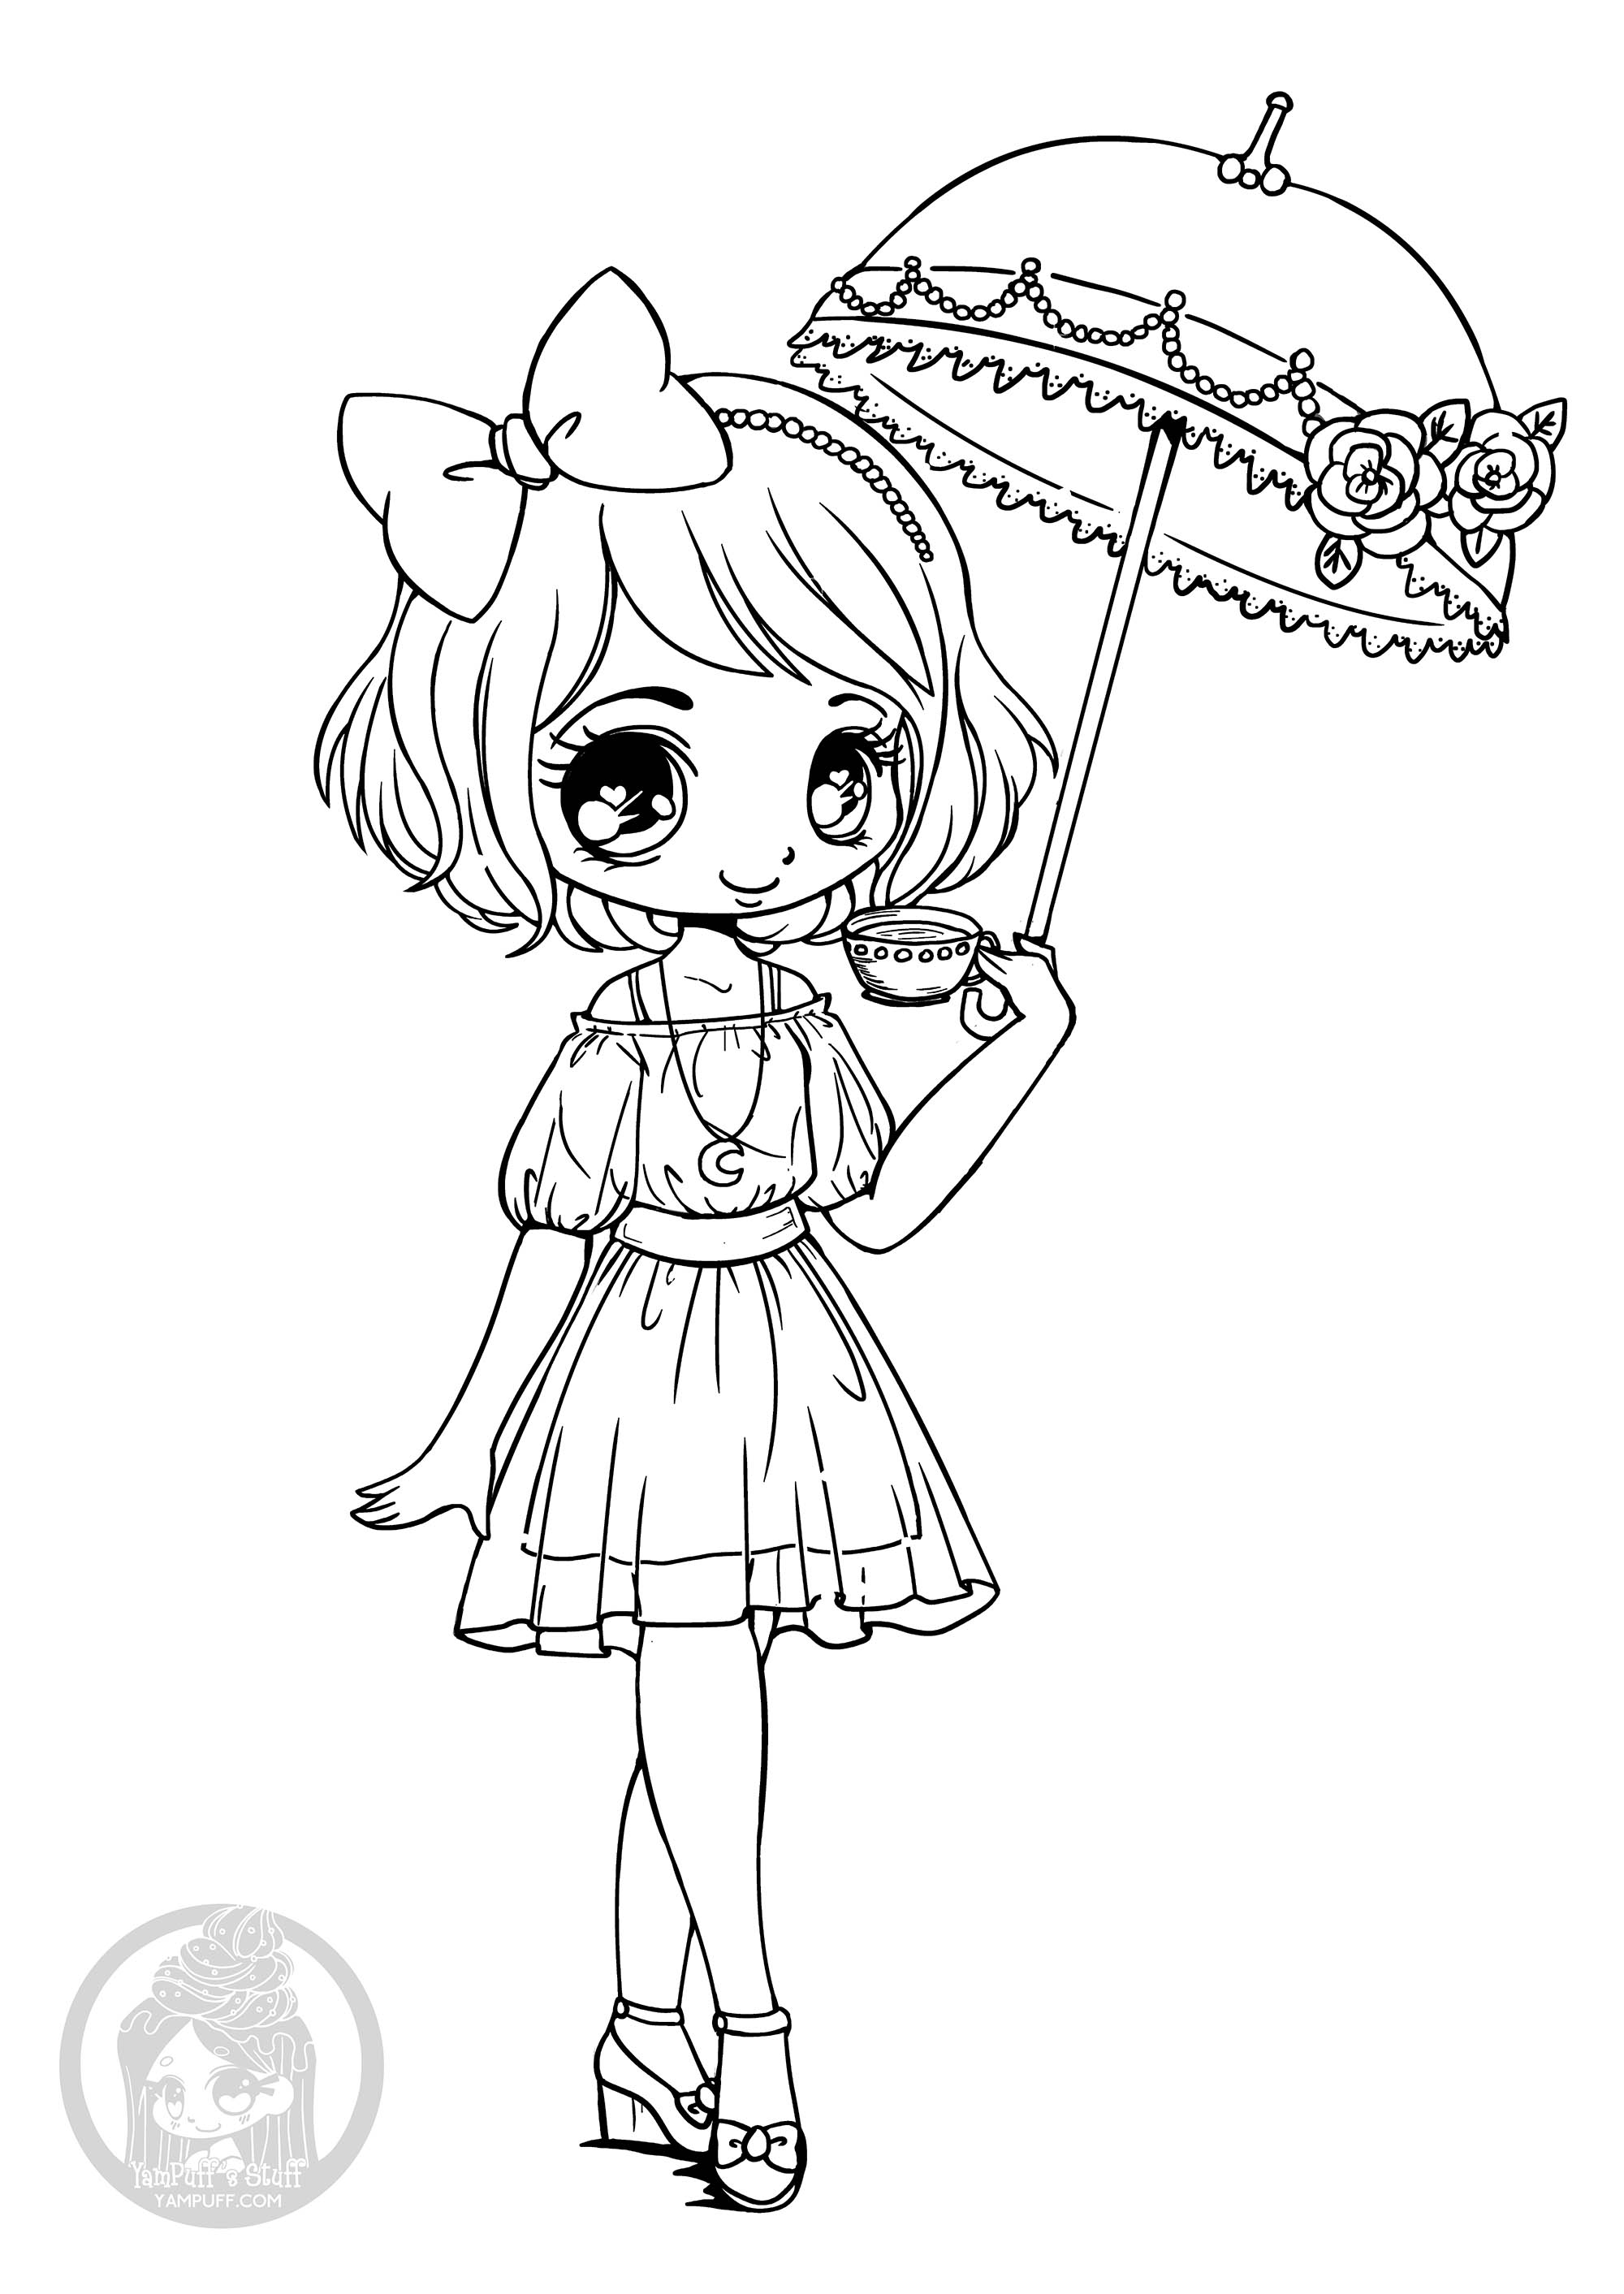 Rainy day ? Come under her umbrella to color this beautiful lady!